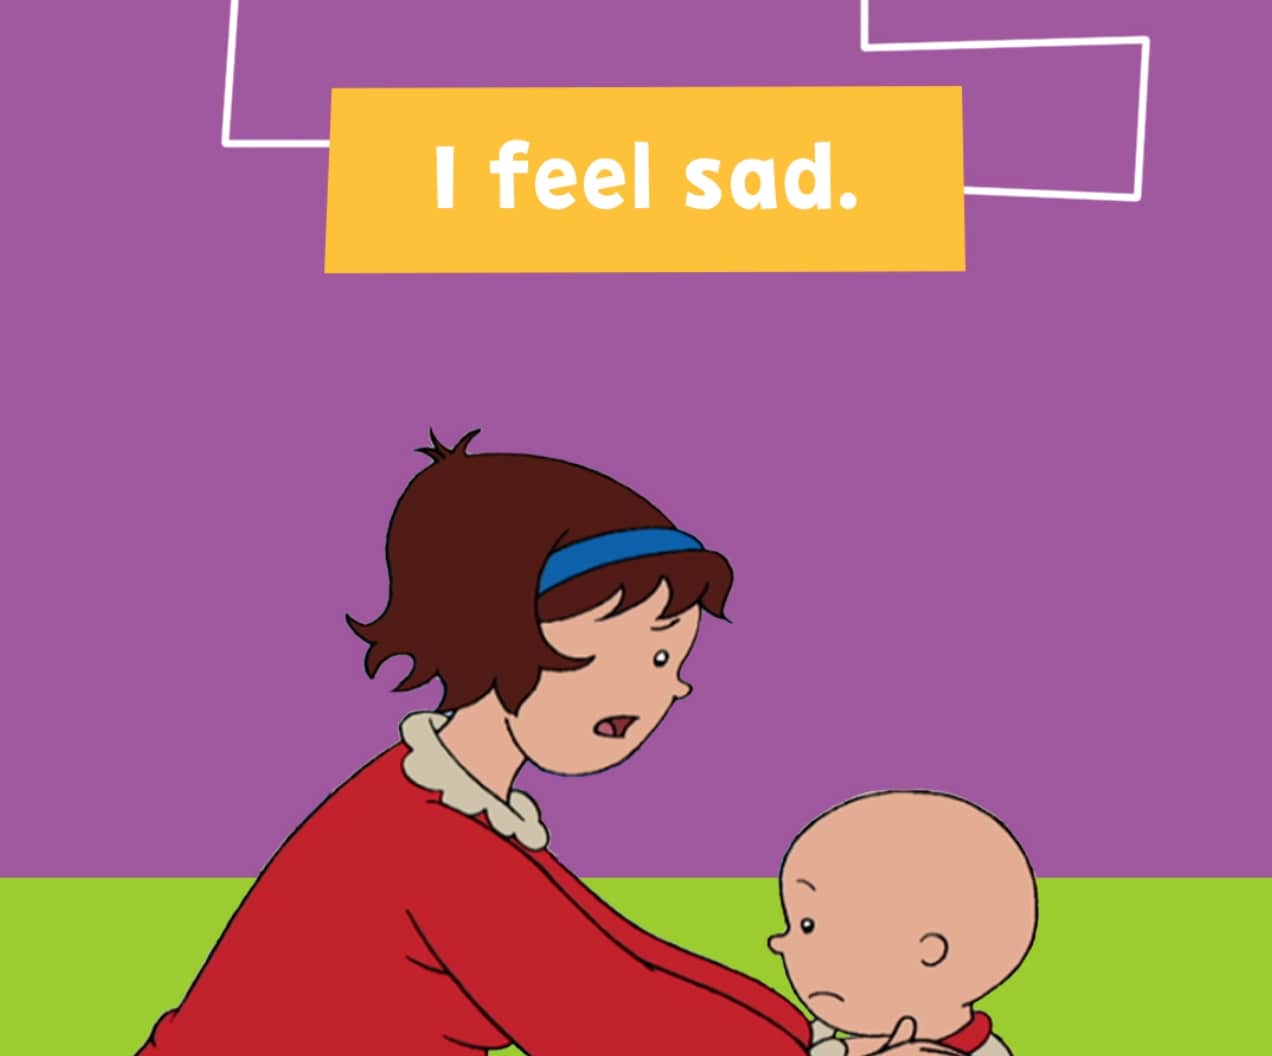 'caillou' has been canceled and parents are celebrating